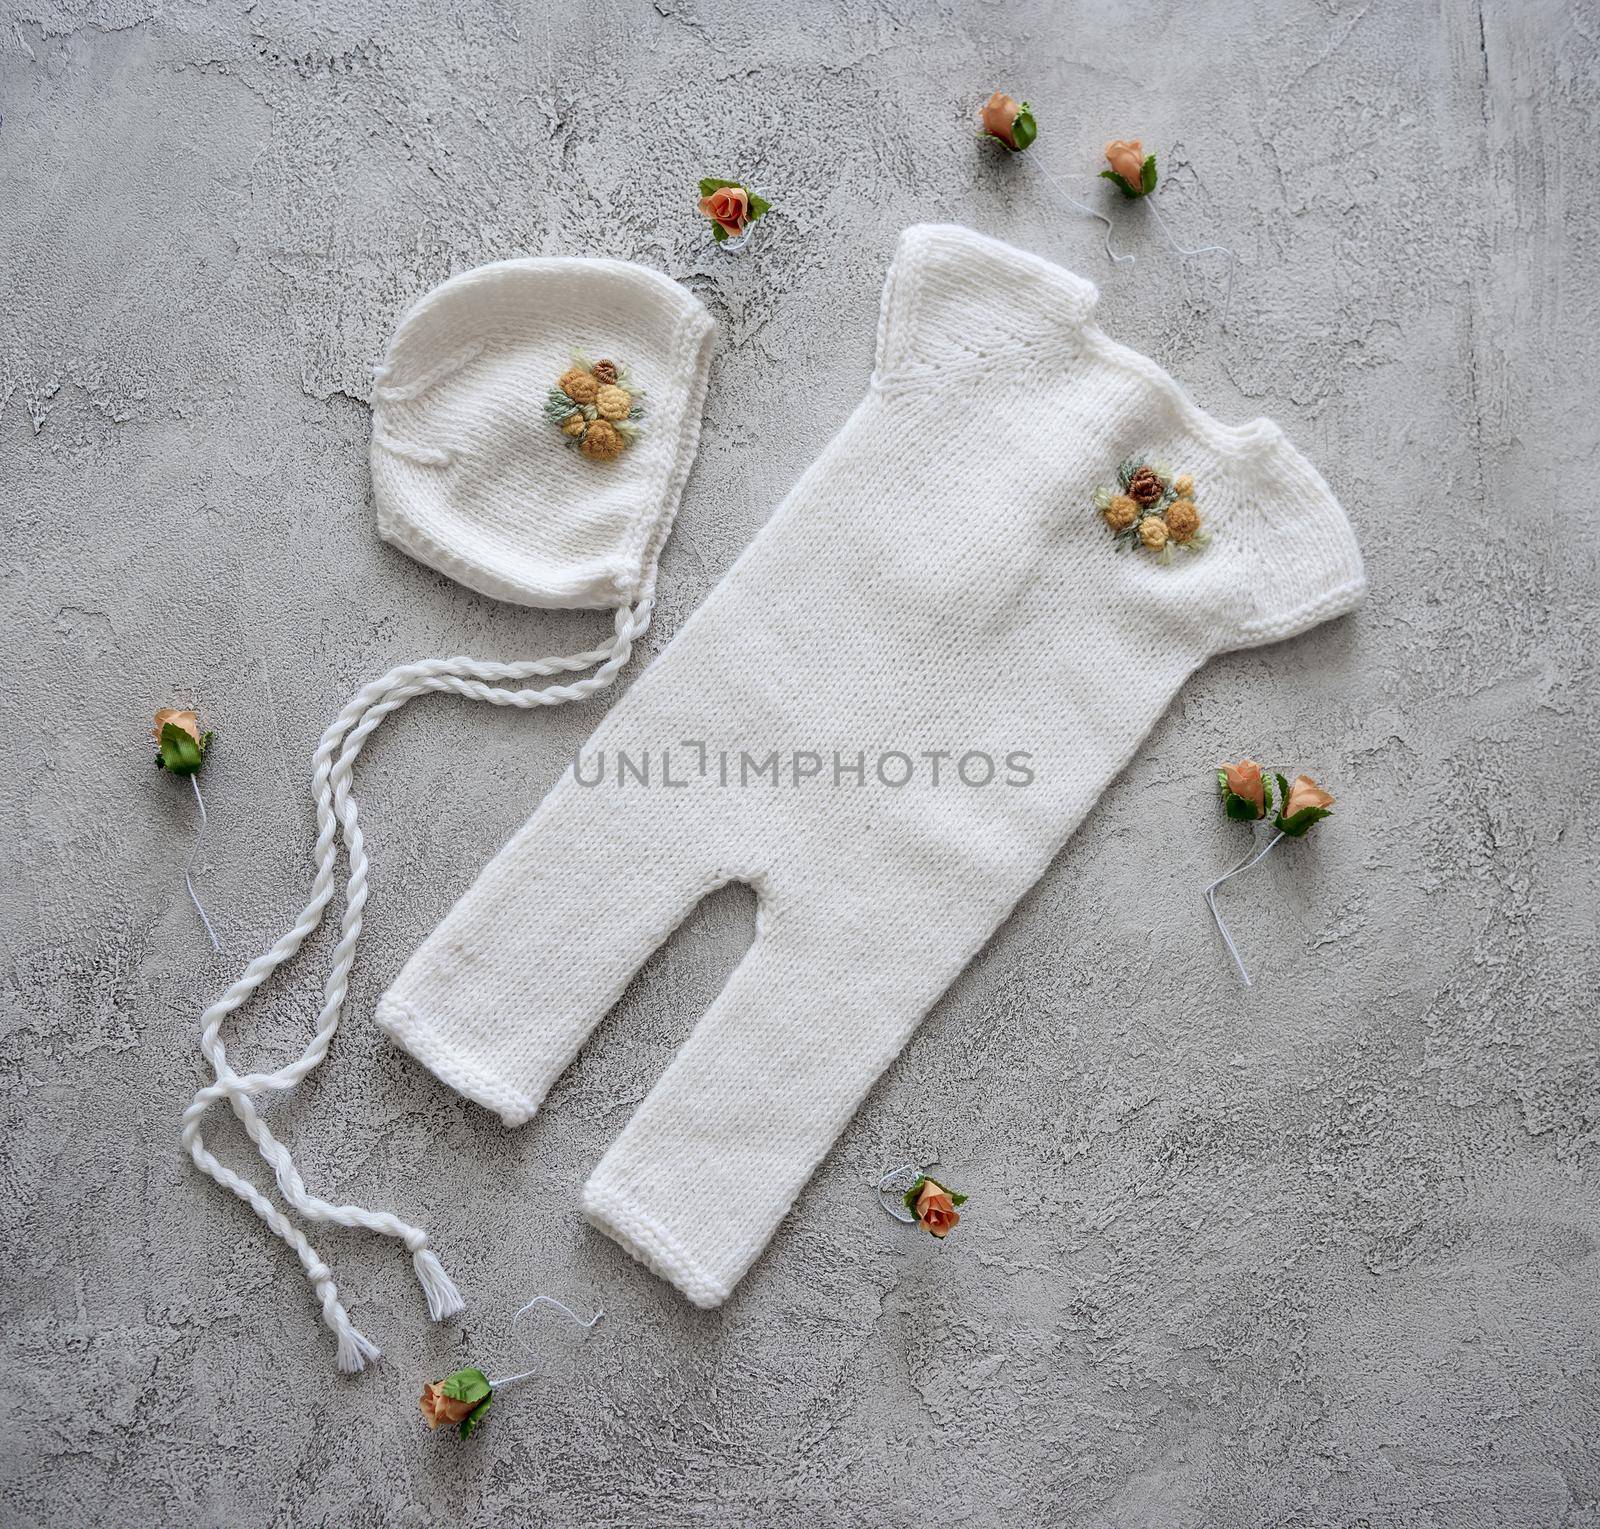 Simple knitted handmade clothes for newborn babies by tan4ikk1